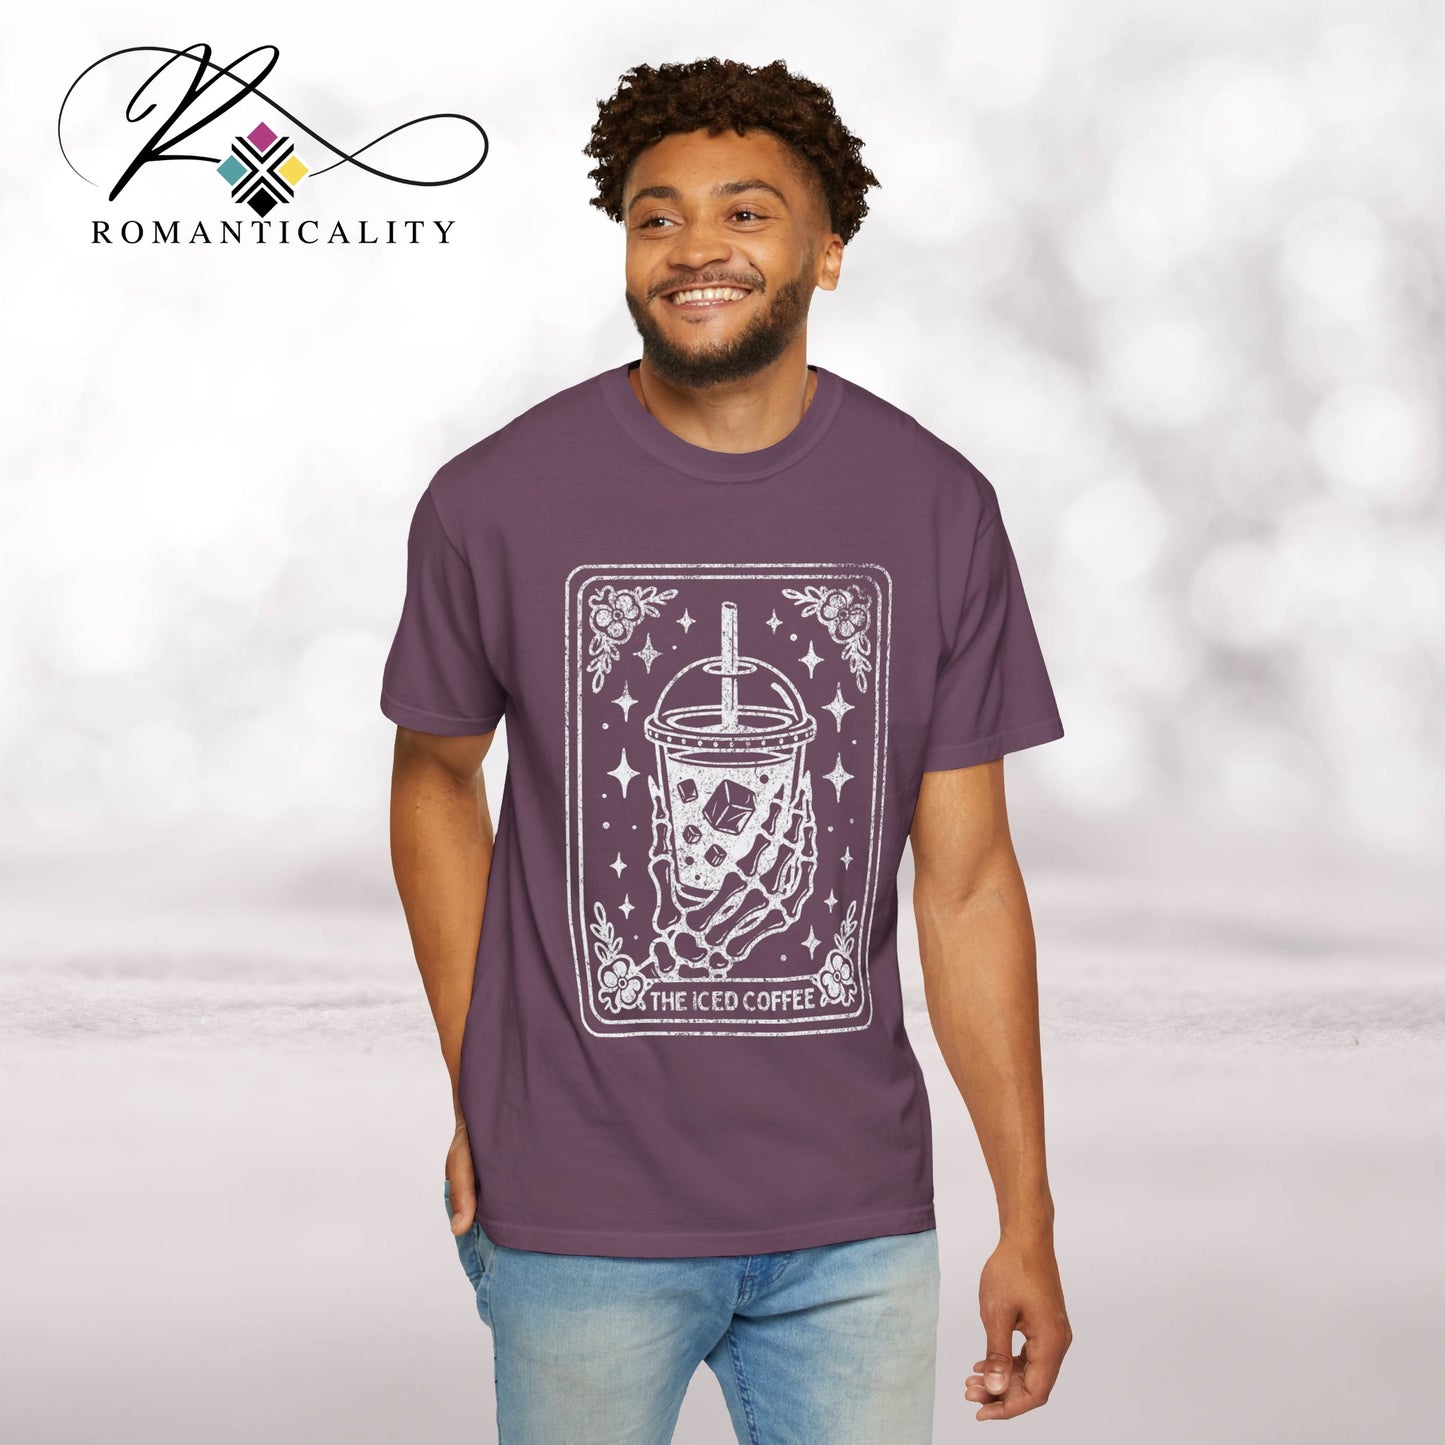 The ICED COFFEE Tarot Graphic T-Shirt-Humorous Tee-Comfort Colors Graphic Tee-Unisex Graphic Tee-Tarot Card Graphic T-shirt-Giftful-Gift-Mother's Day